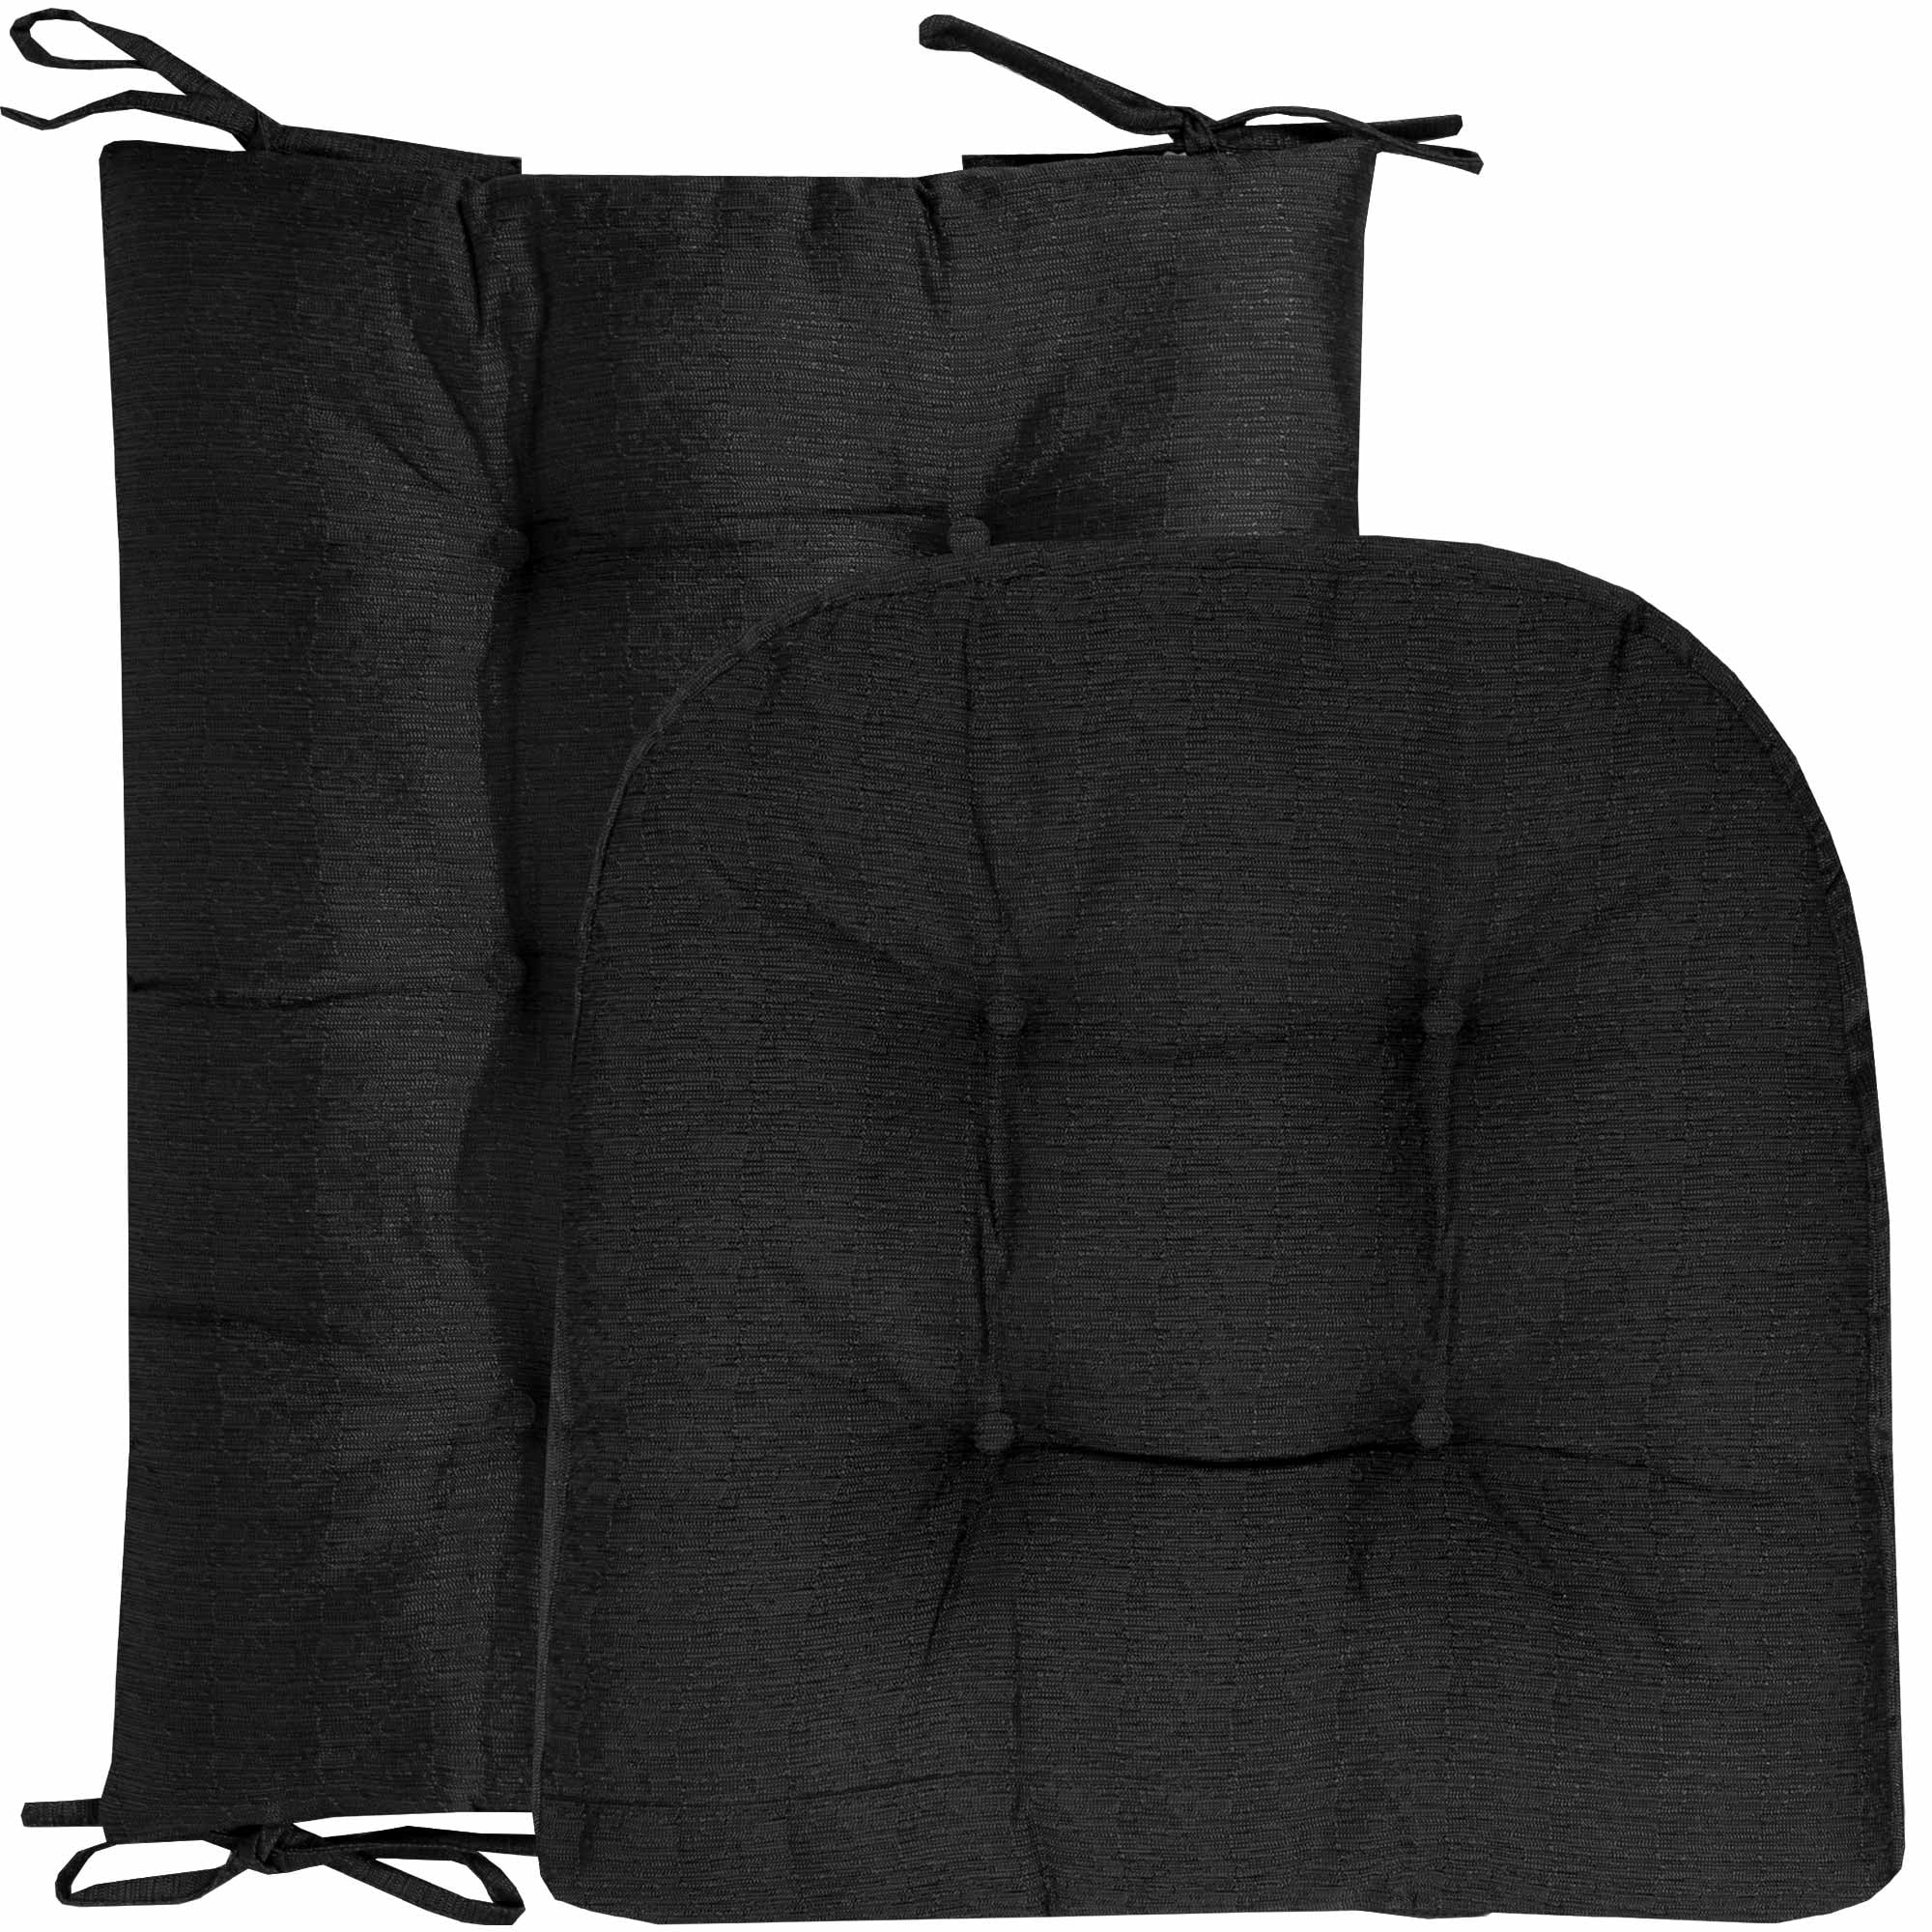 Sweet Home Collection Crushed Memory Foam Tufted Chair Cushion Non Slip Microdot Rubber Back, Black, 6 Pack